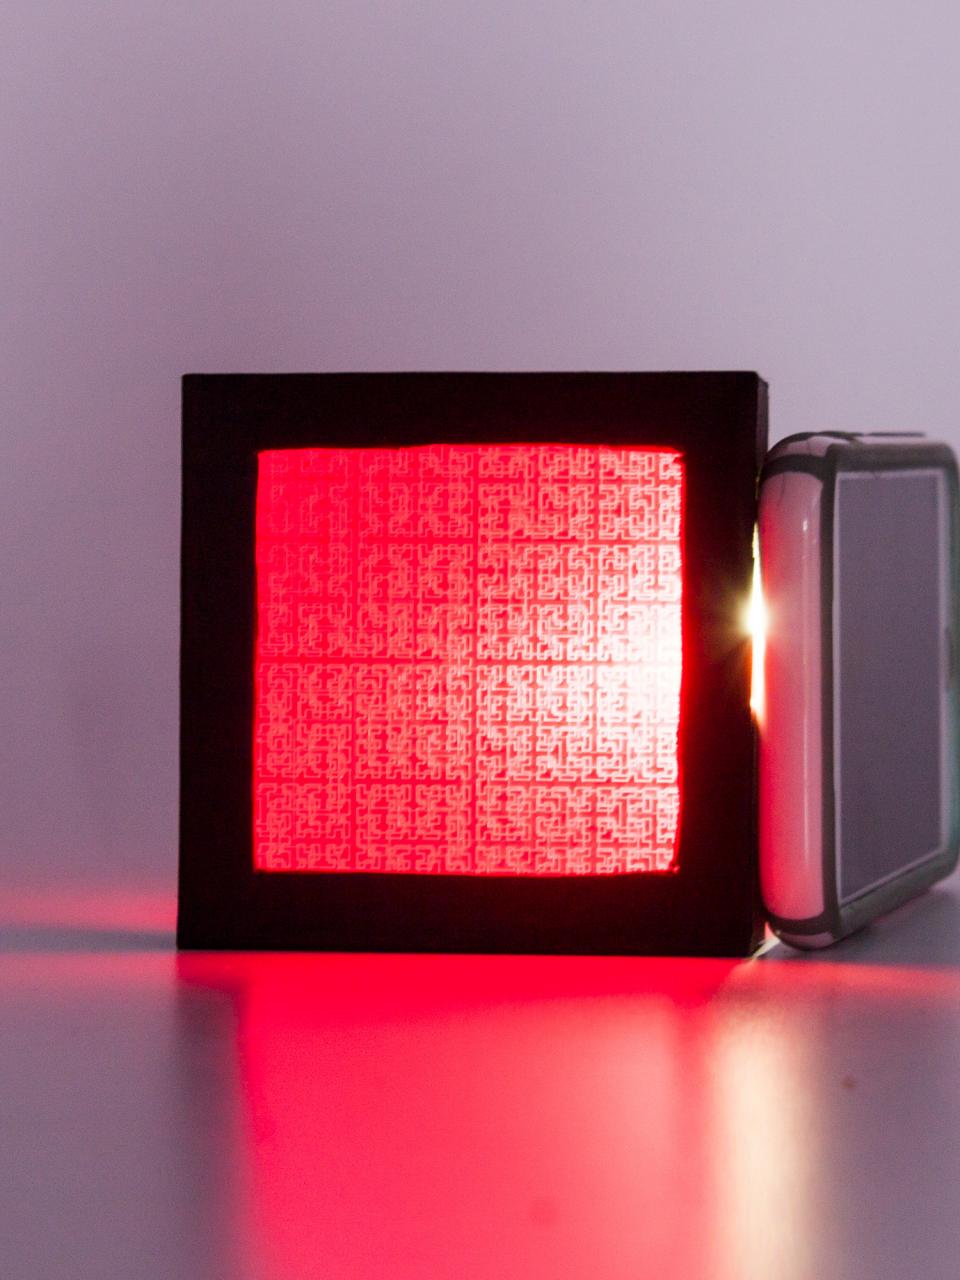 A black frame captures a red screen in which the light source behind it exposes a printed pattern.